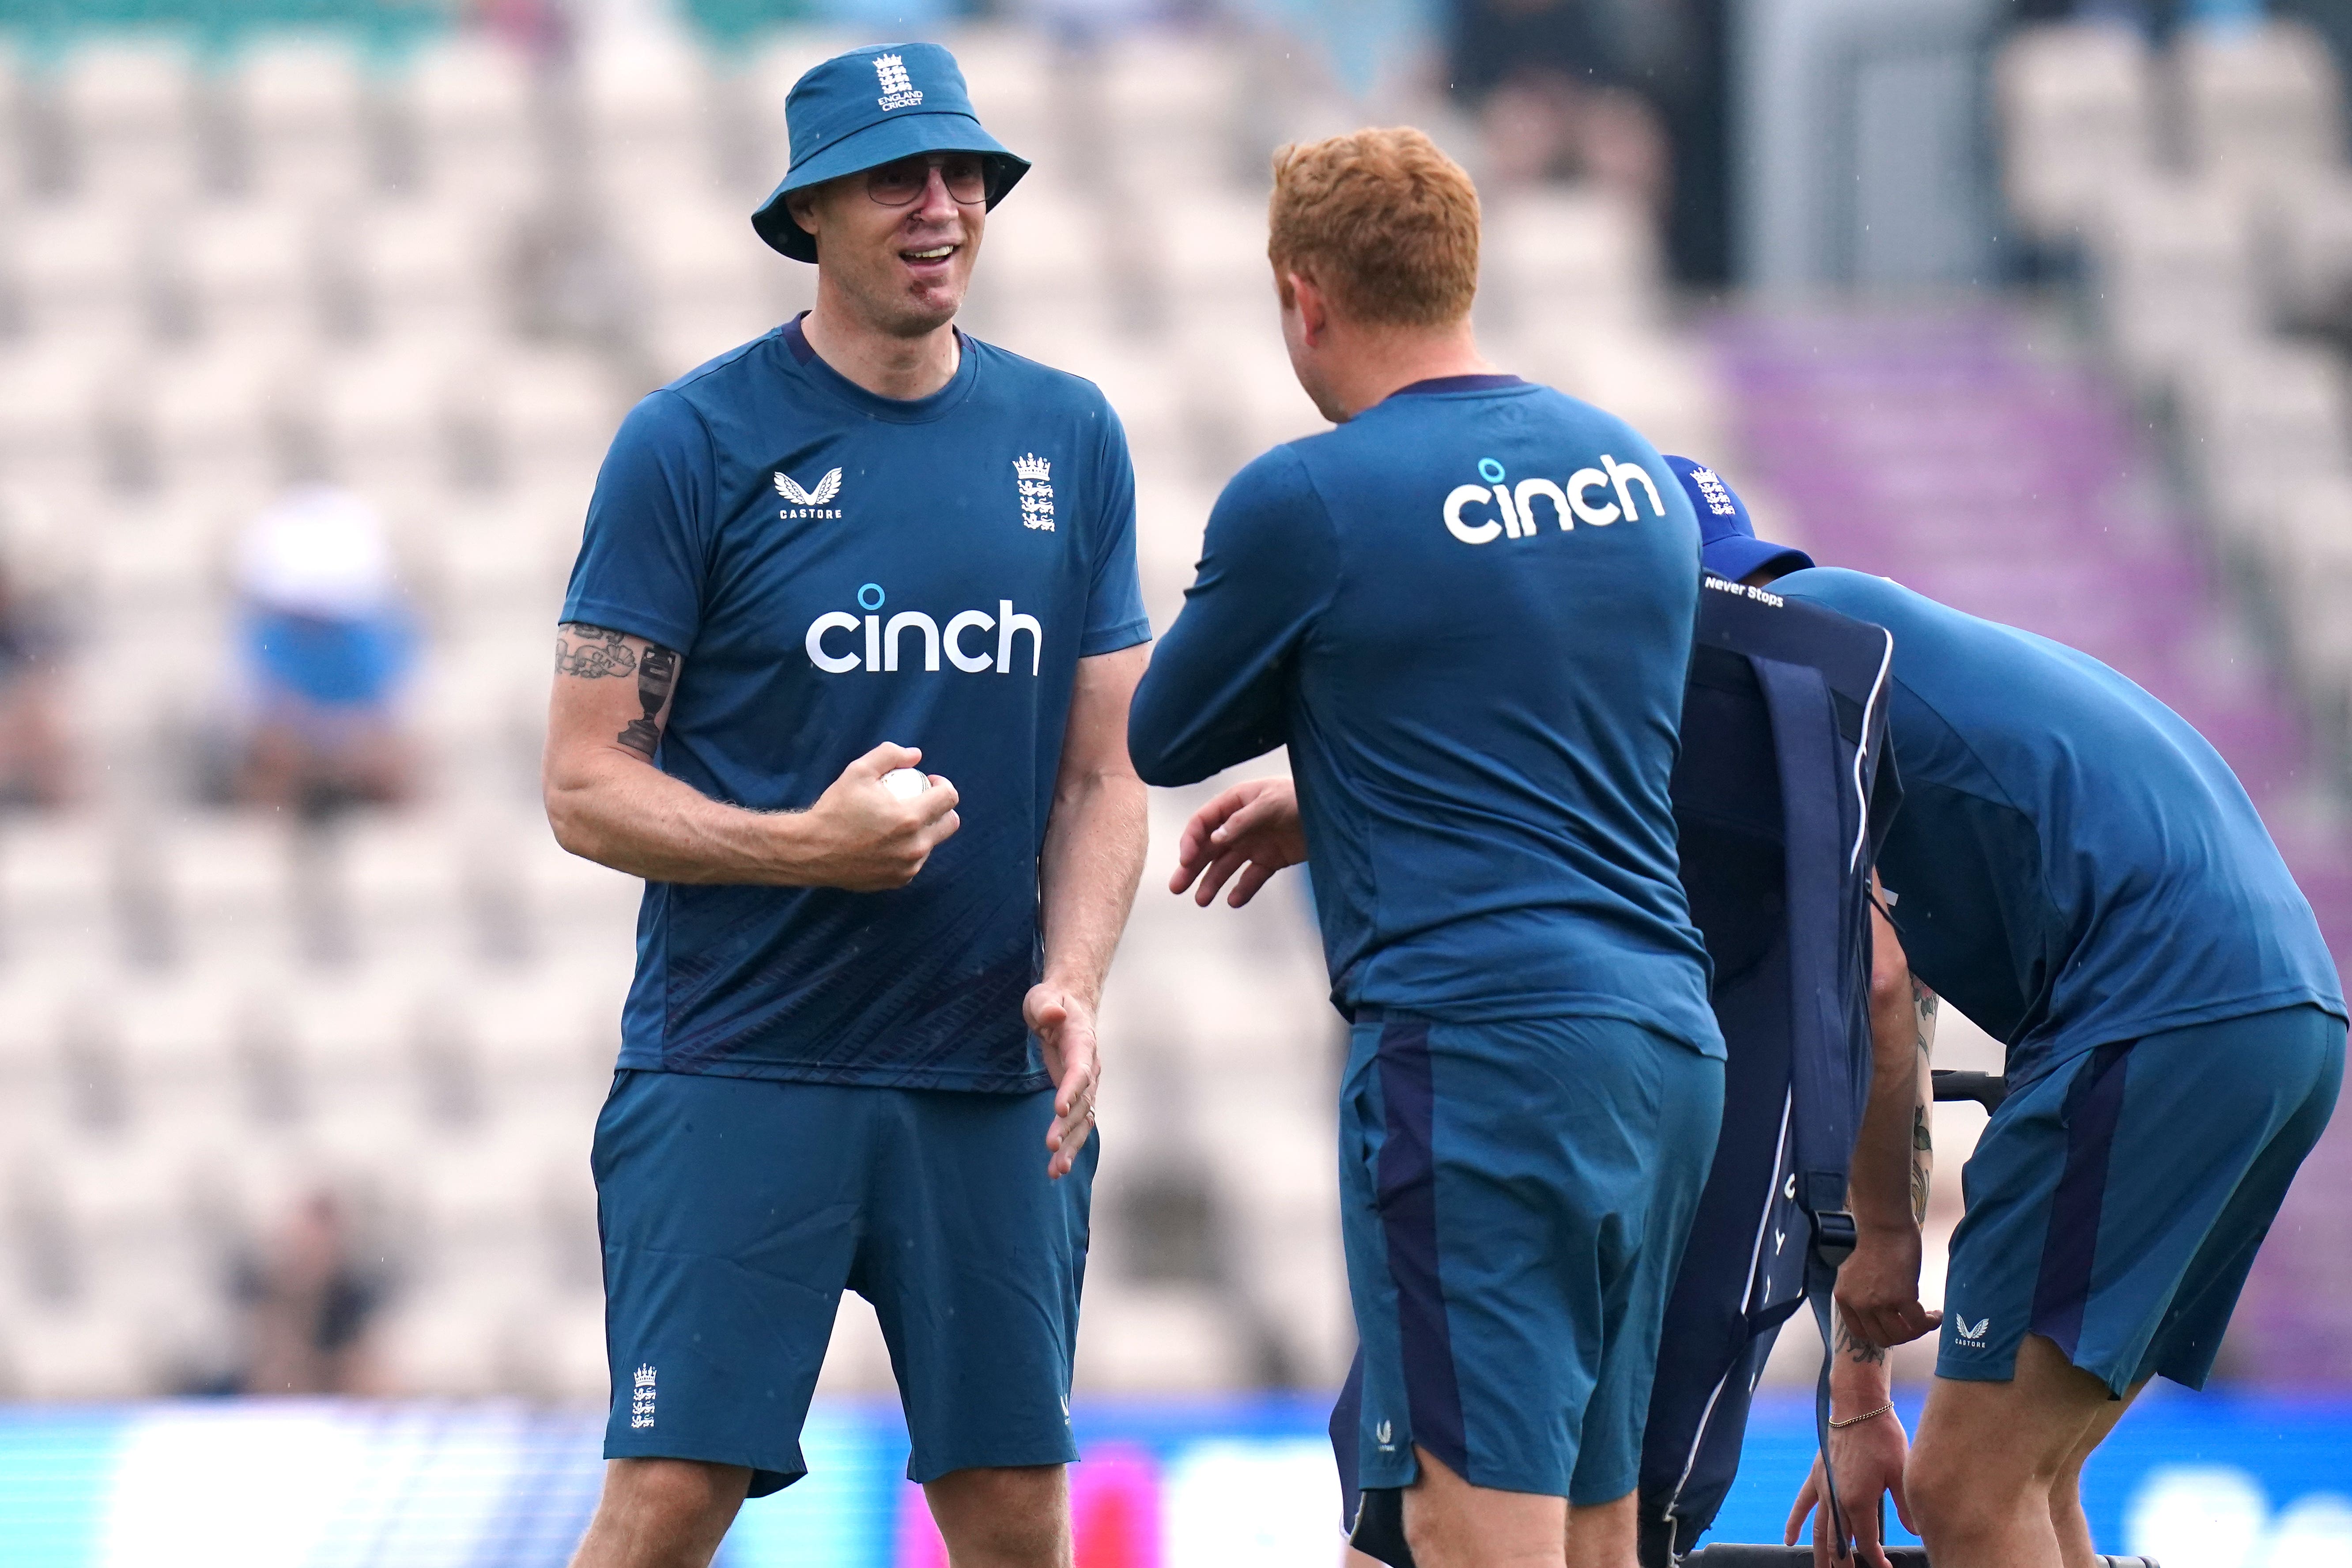 Andrew Flintoff joined up with the England team during their recent ODI’s against New Zealand